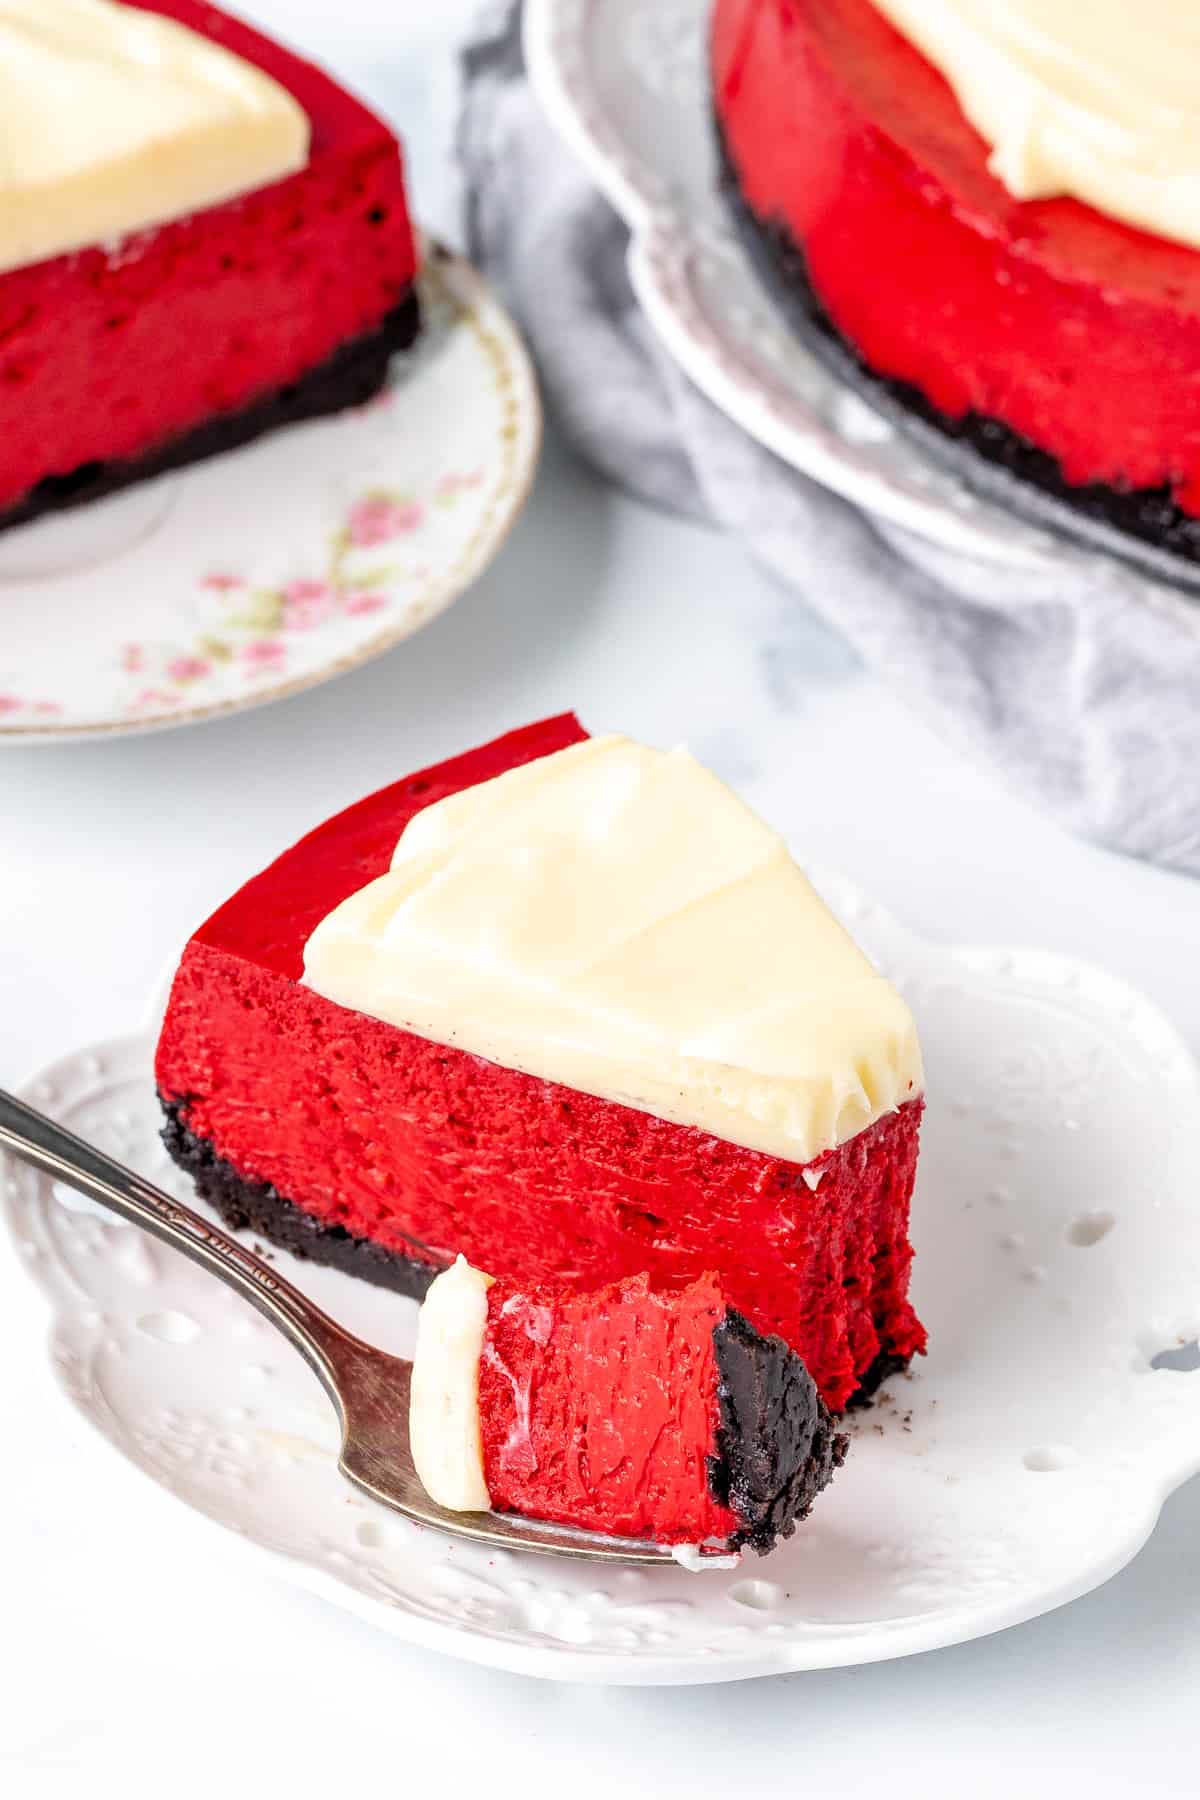 Slice of red velvet cheesecake with a bite taken out of it